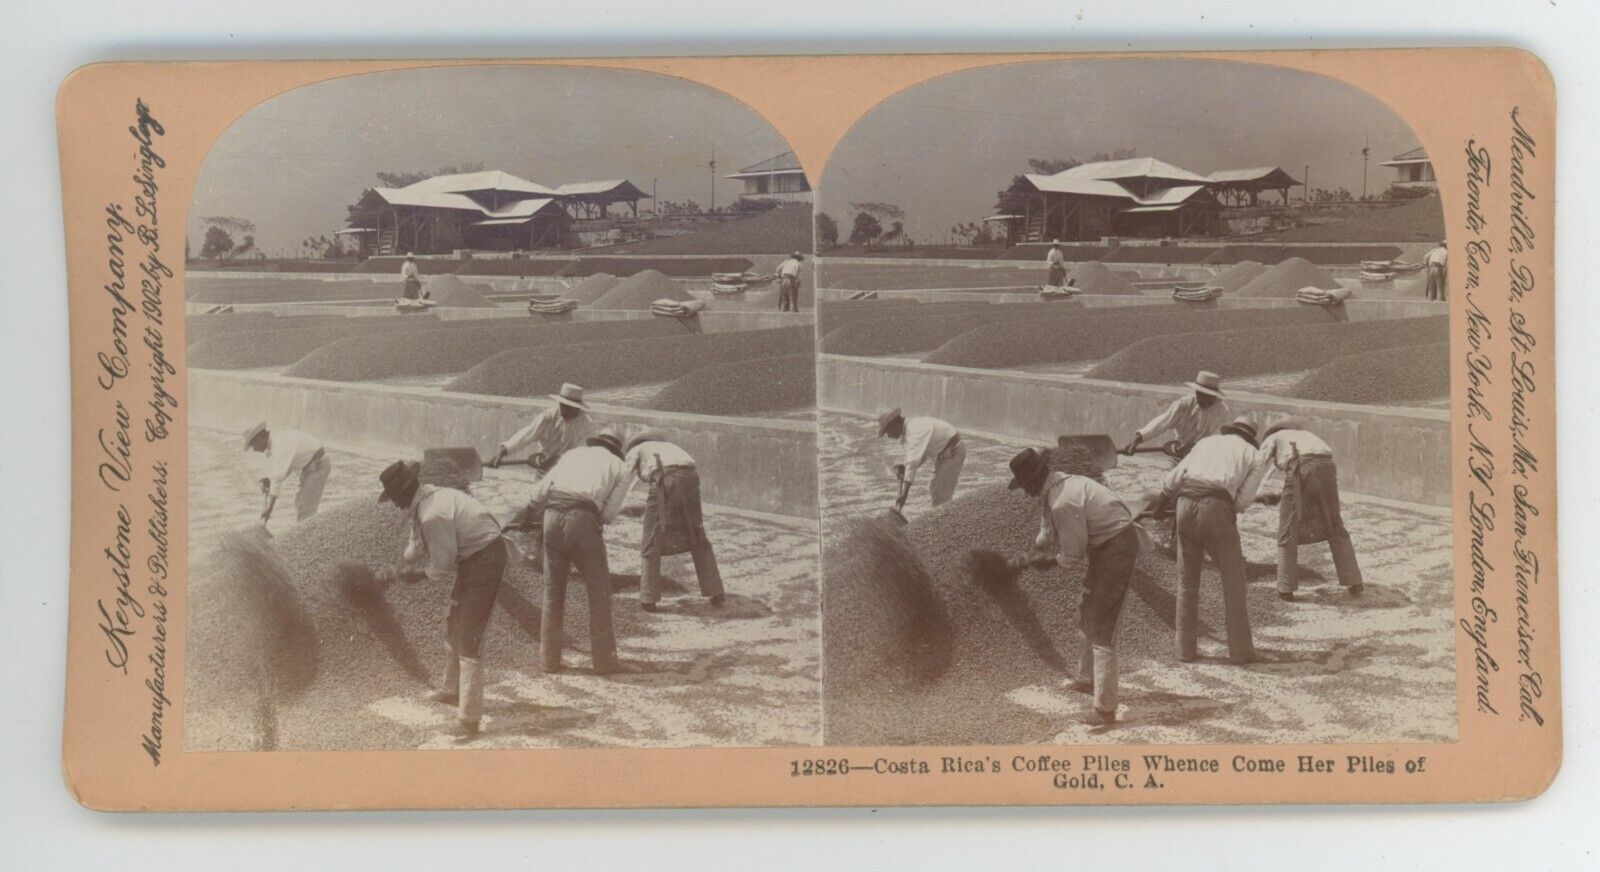 c1900's Real Photo Stereoview Farmers Working Costa Rica's Coffee Piles